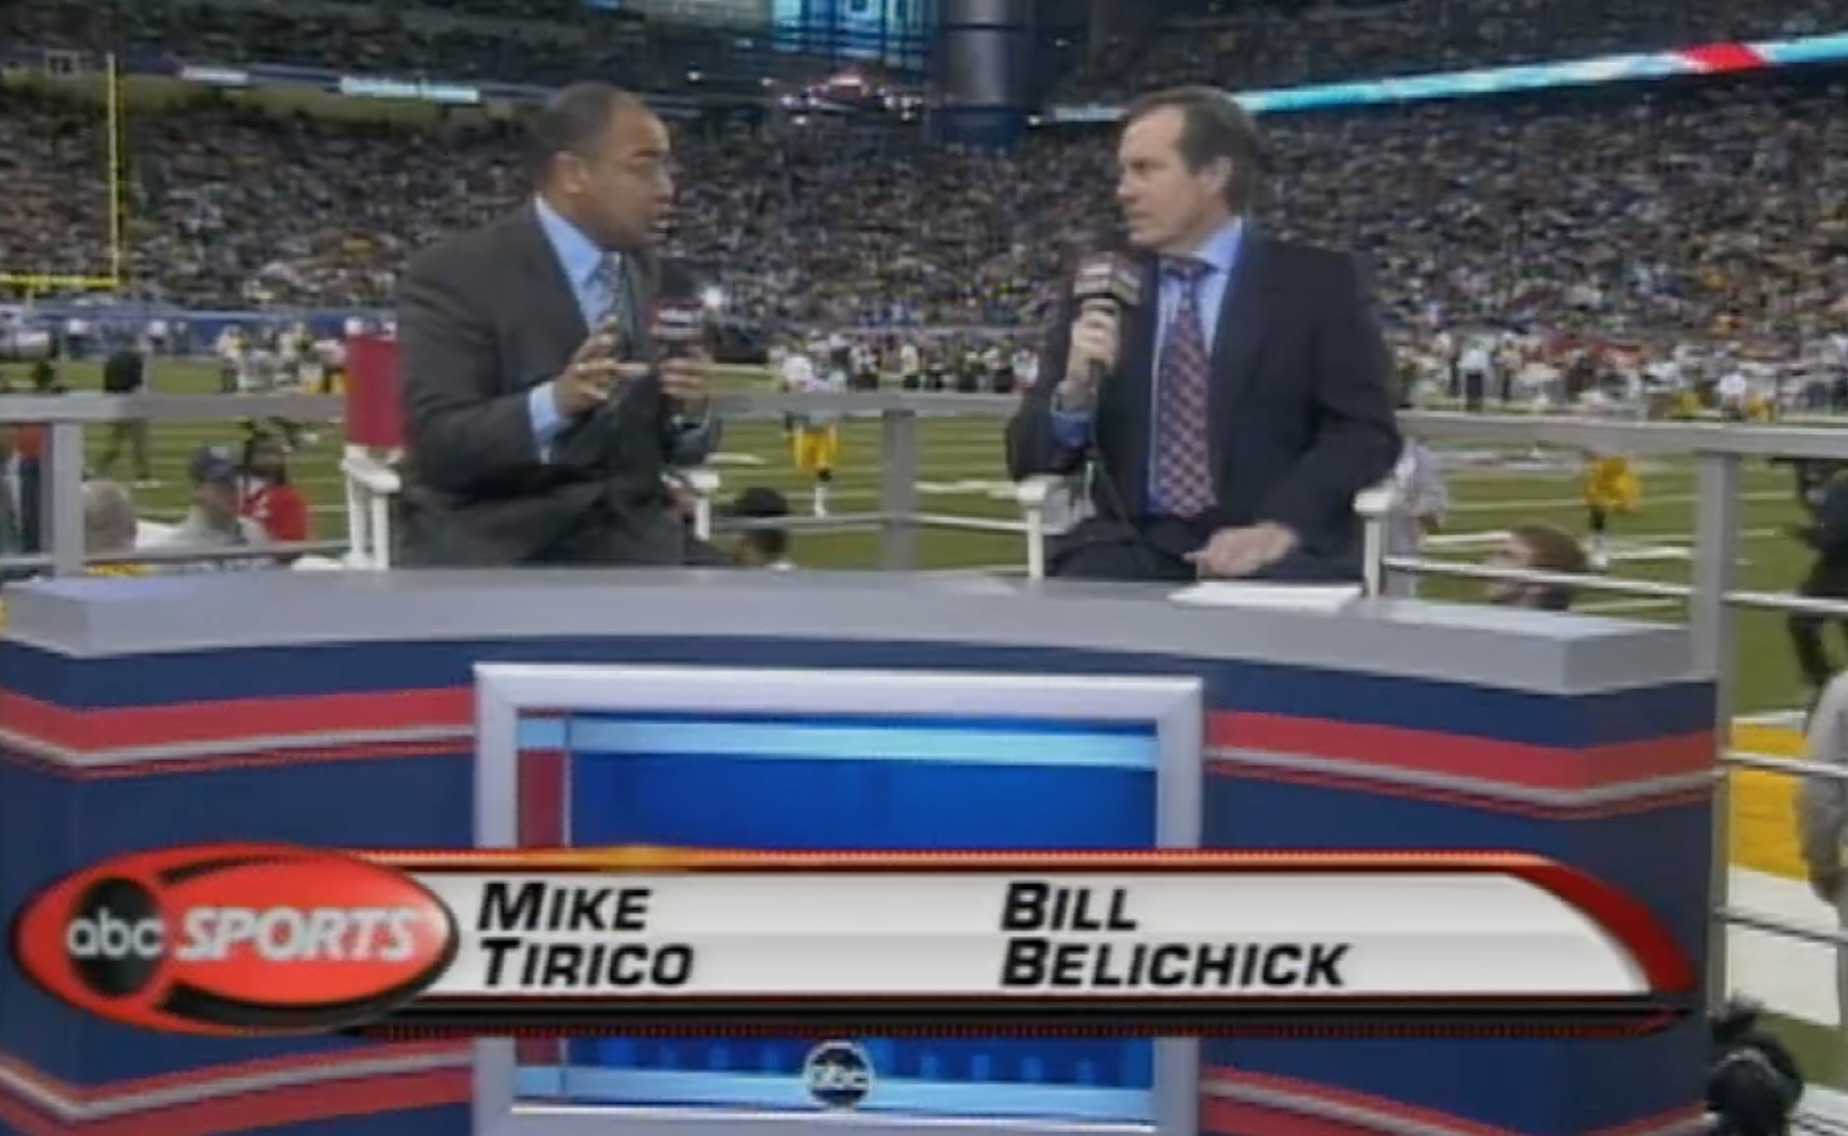 Bill Belichick ready to head back to the TV booth?